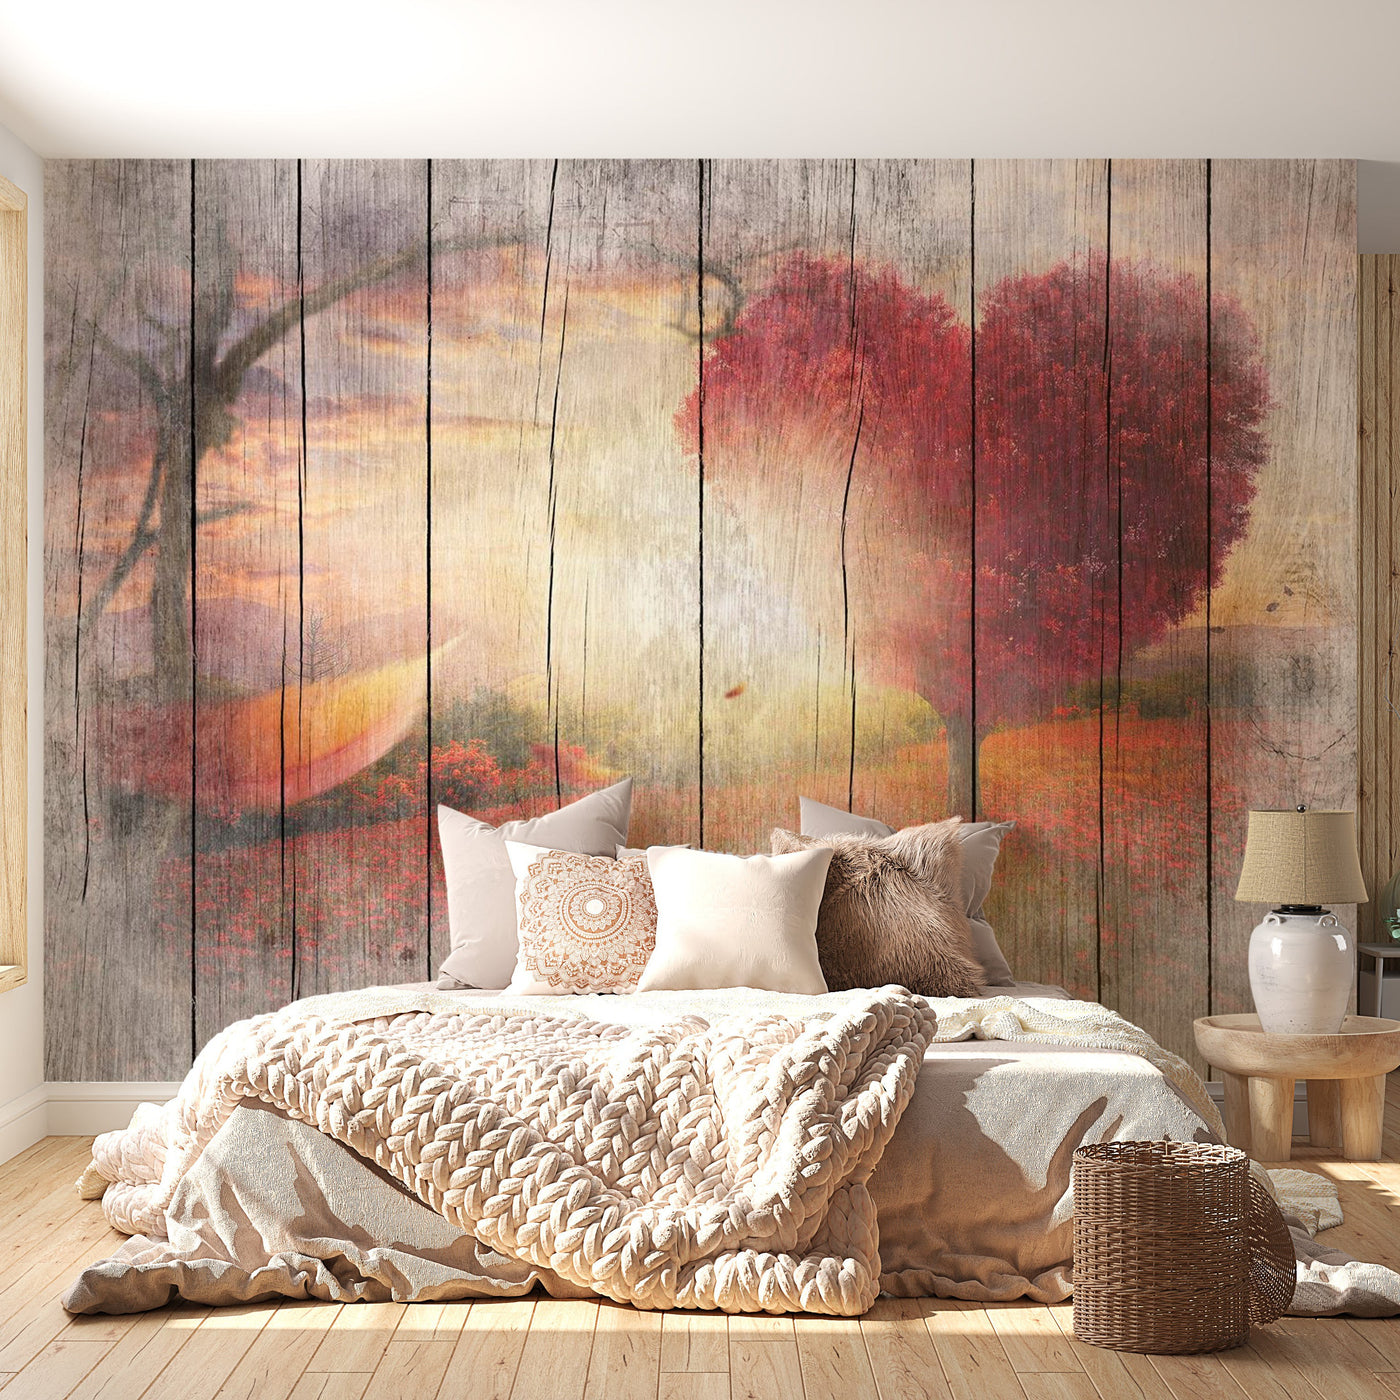 Peel & Stick Wall Mural - Autumnal Love - Removable Wall Decals